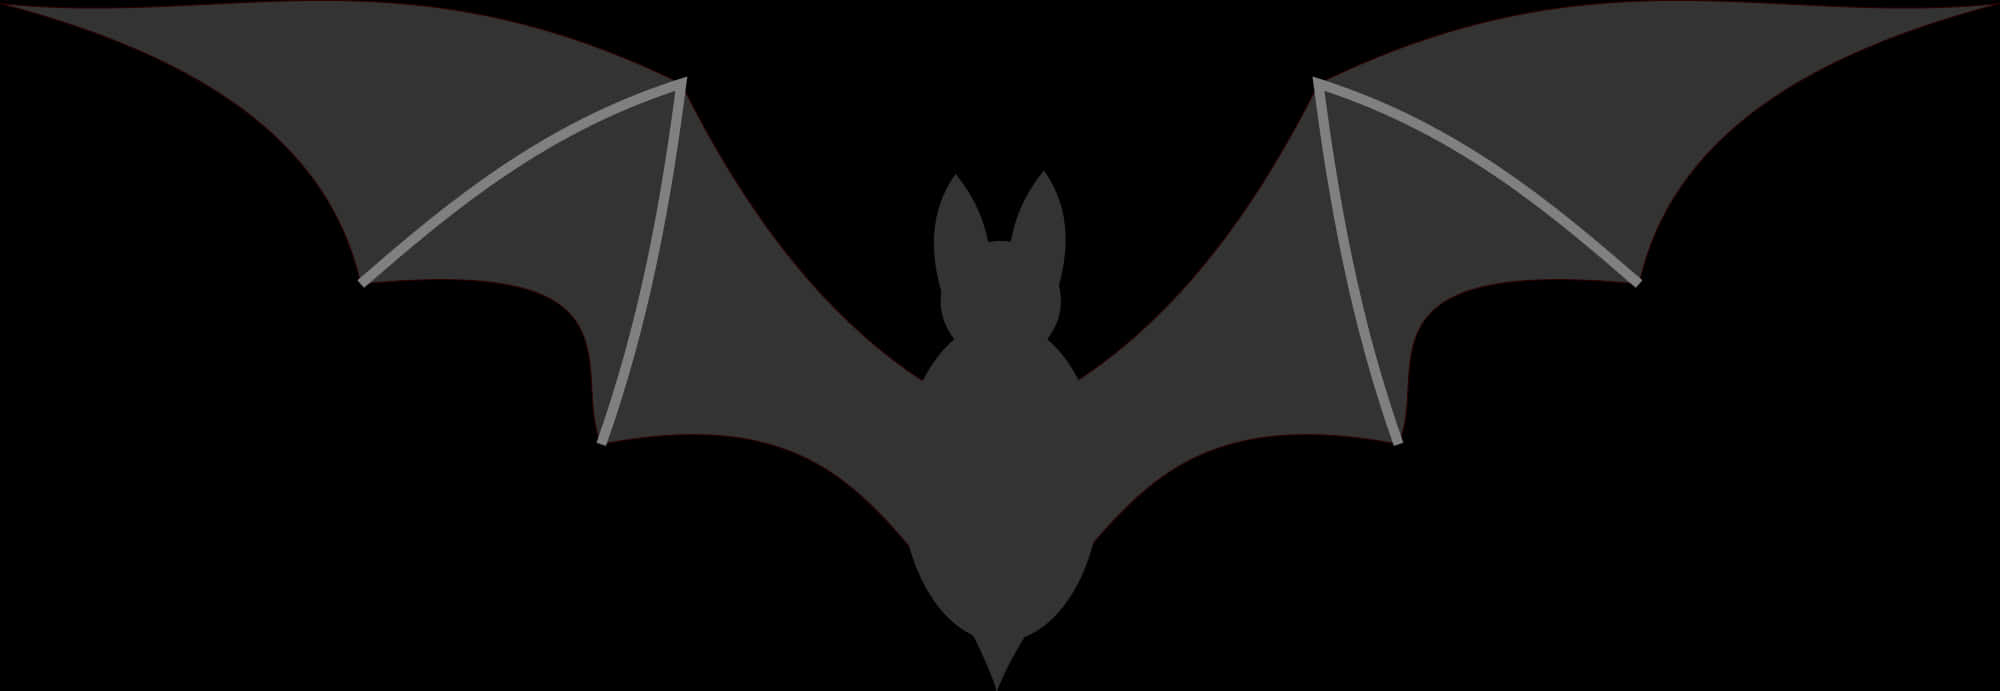 A Bat With Wings And Wings